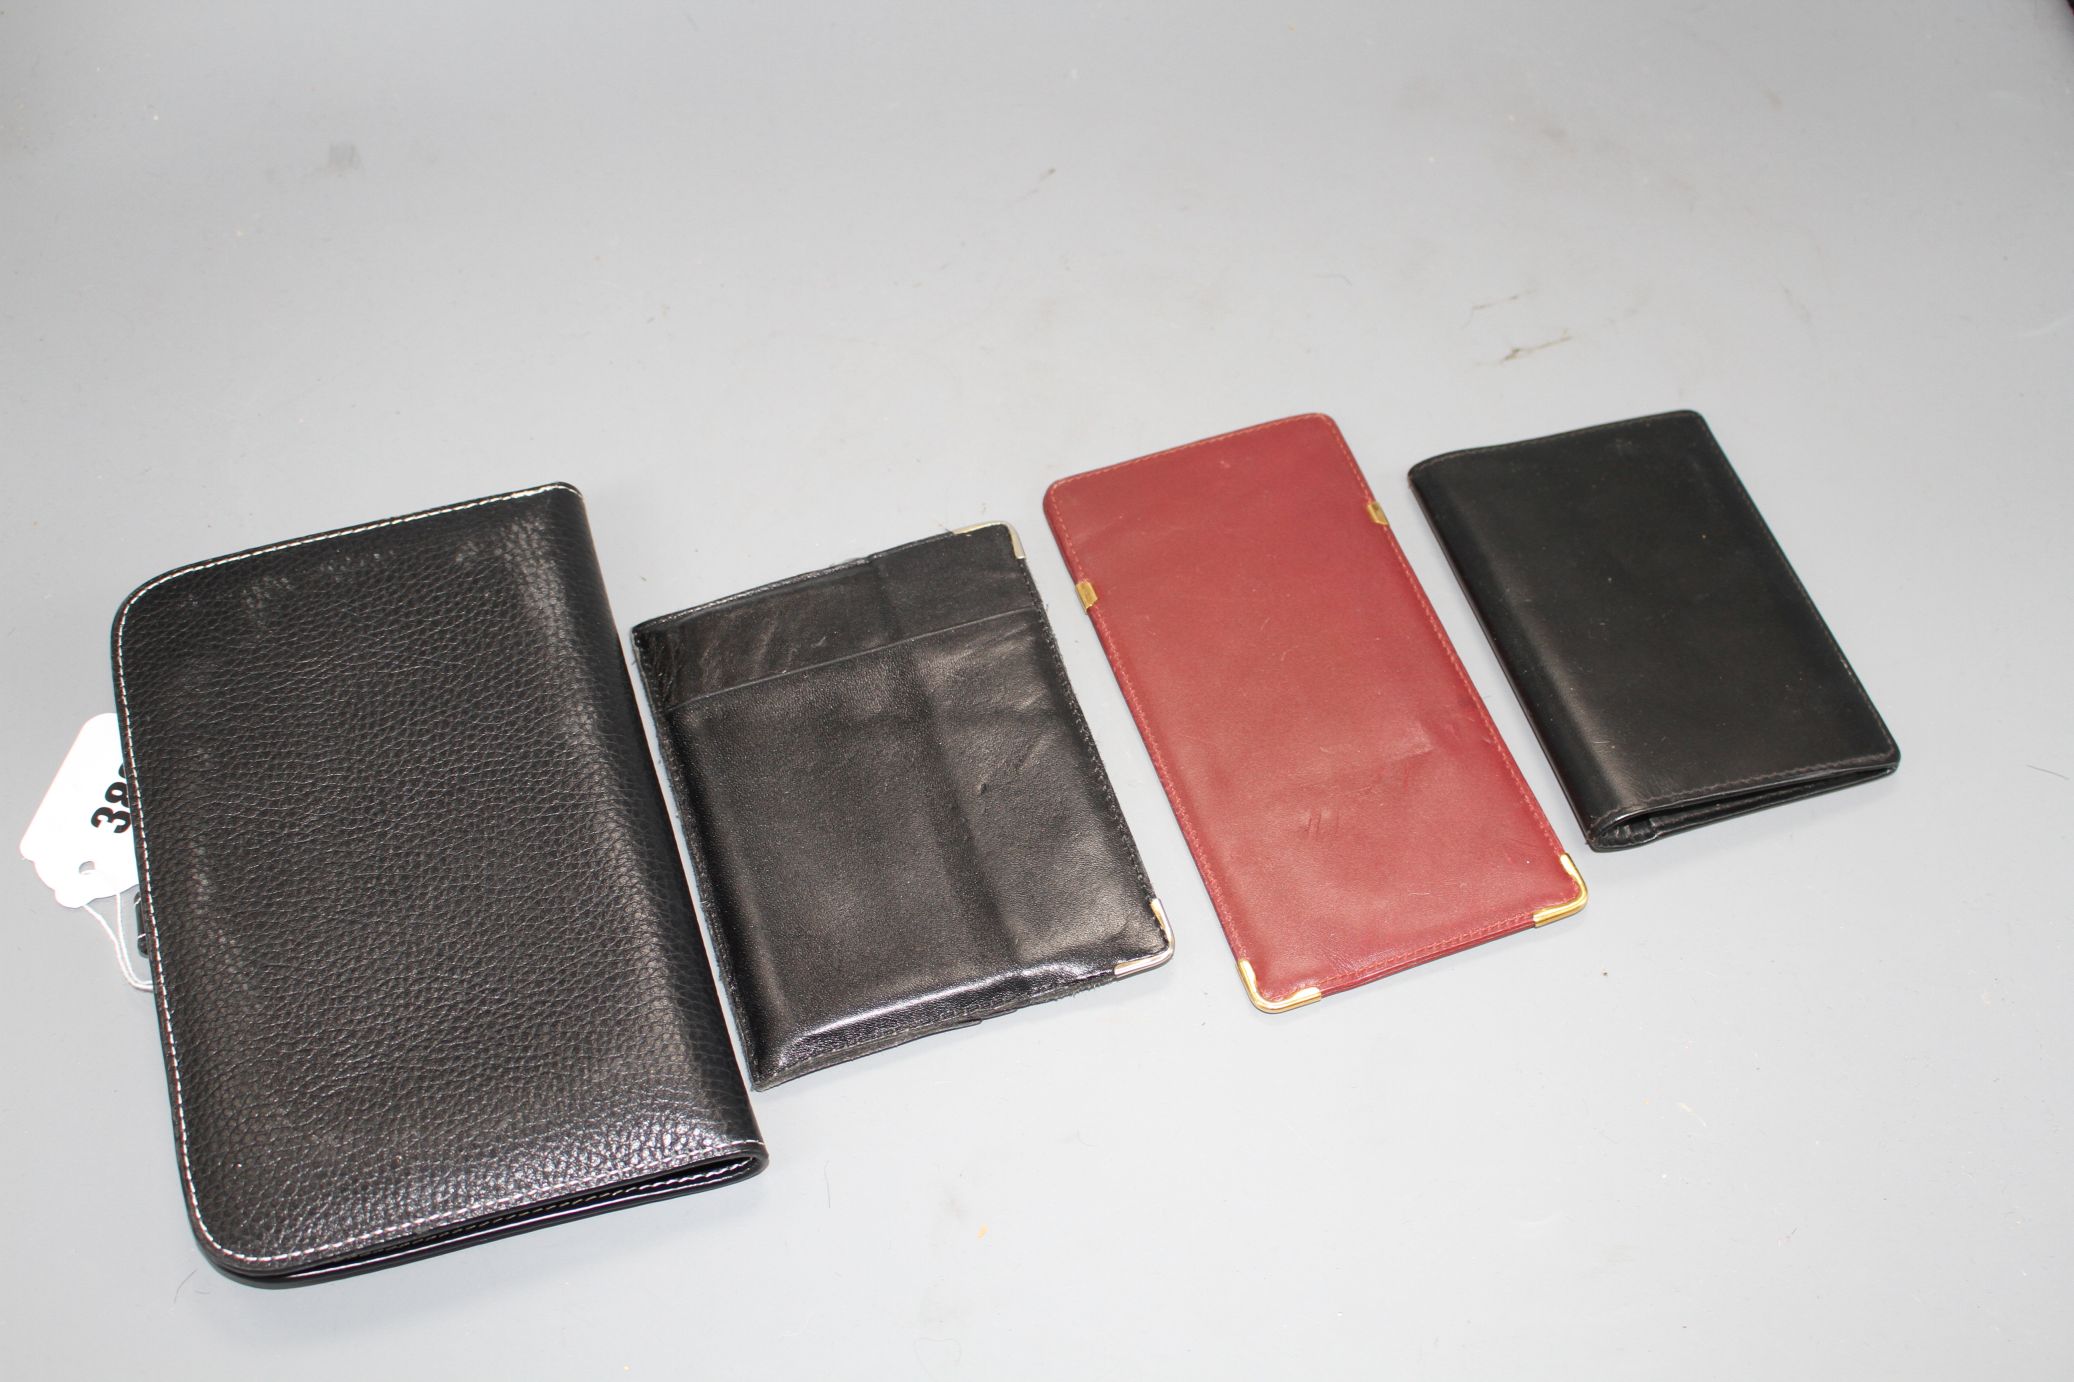 A Hermes leather filofax case, a Cartier leather passport holder, card holder and spectacle case - Image 2 of 3